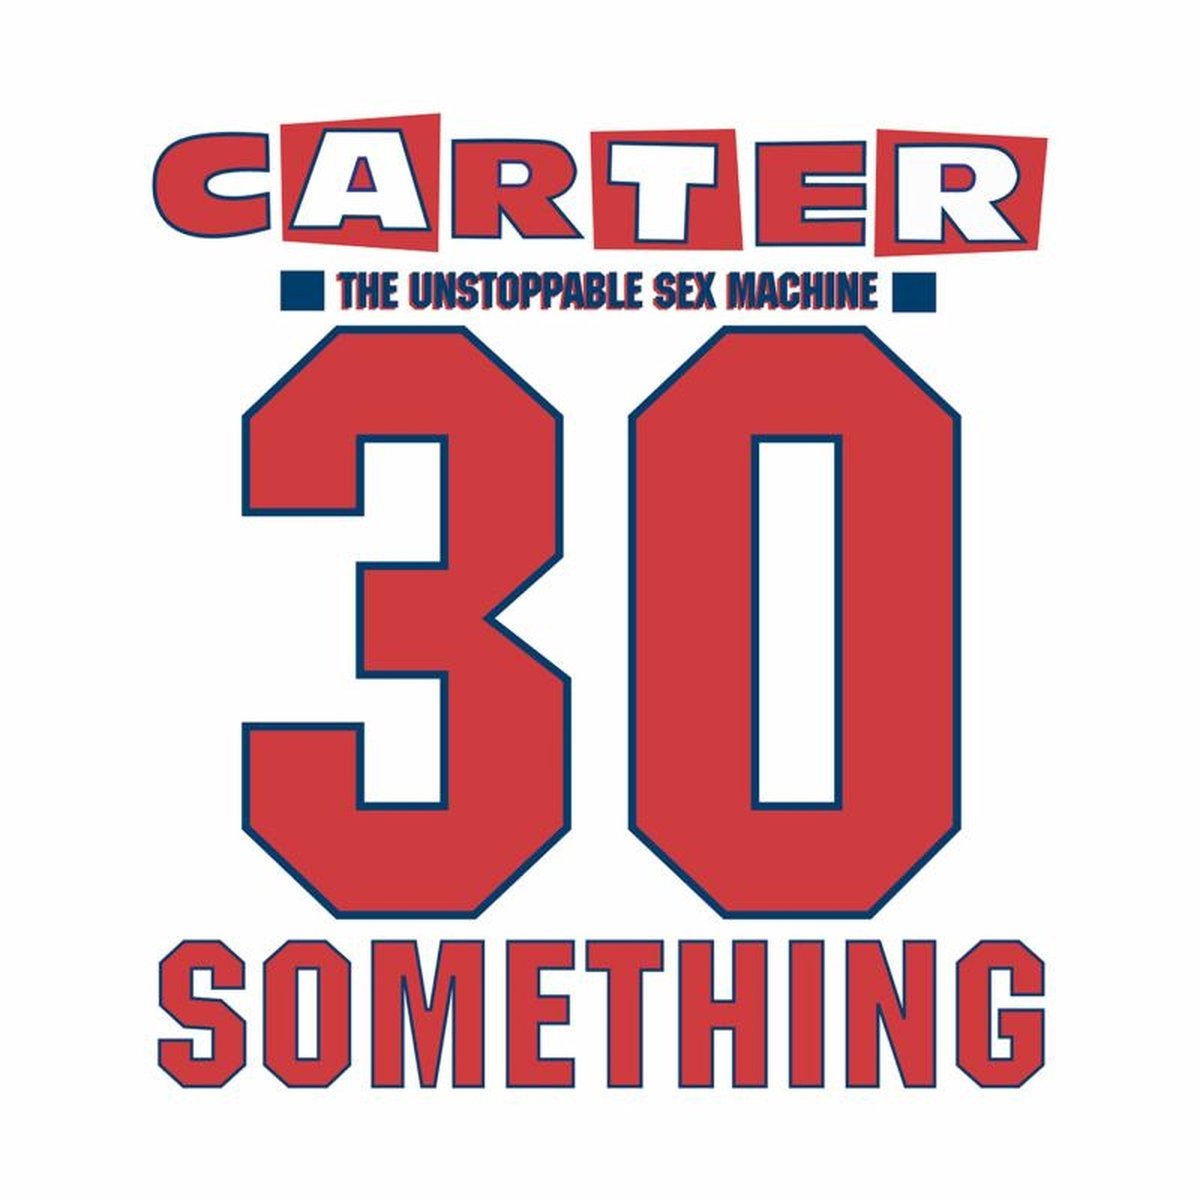 Carter The Unstoppable Sex Machine - 30 Something (CD), Carter the  Unstoppable Sex... | bol.com